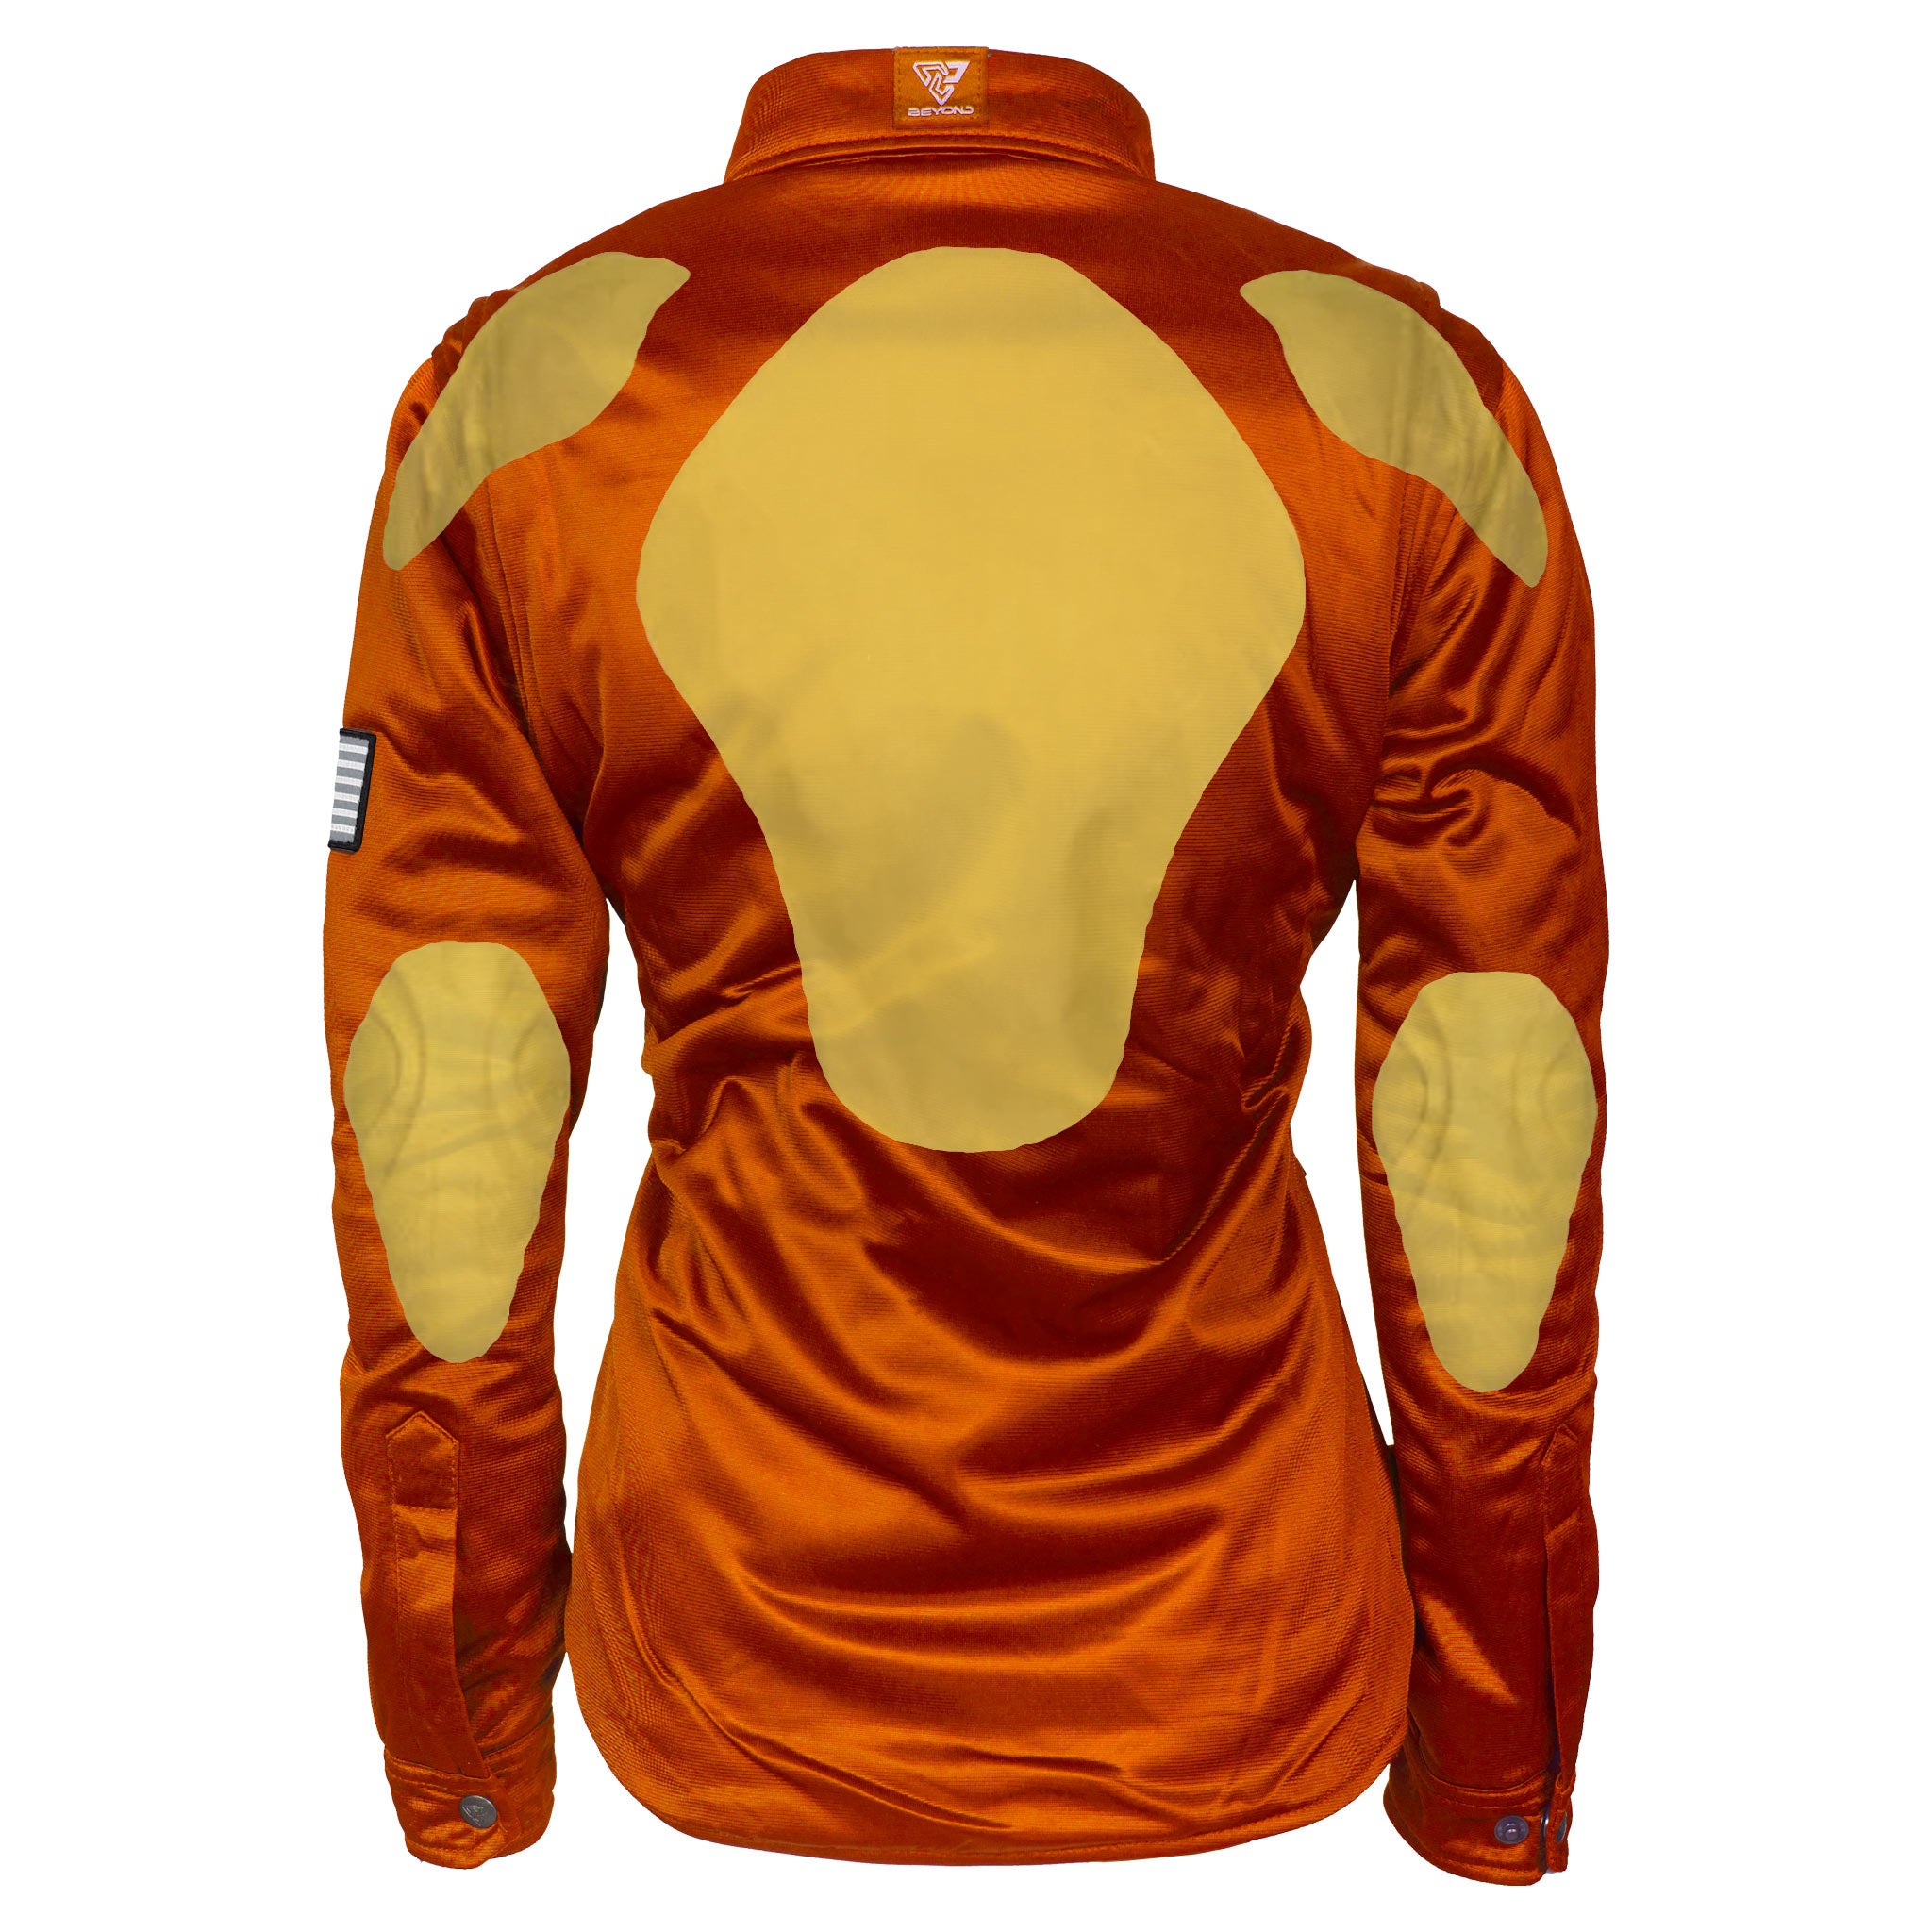 Ultra Protective Shirt for Women - Orange Solid with Pads